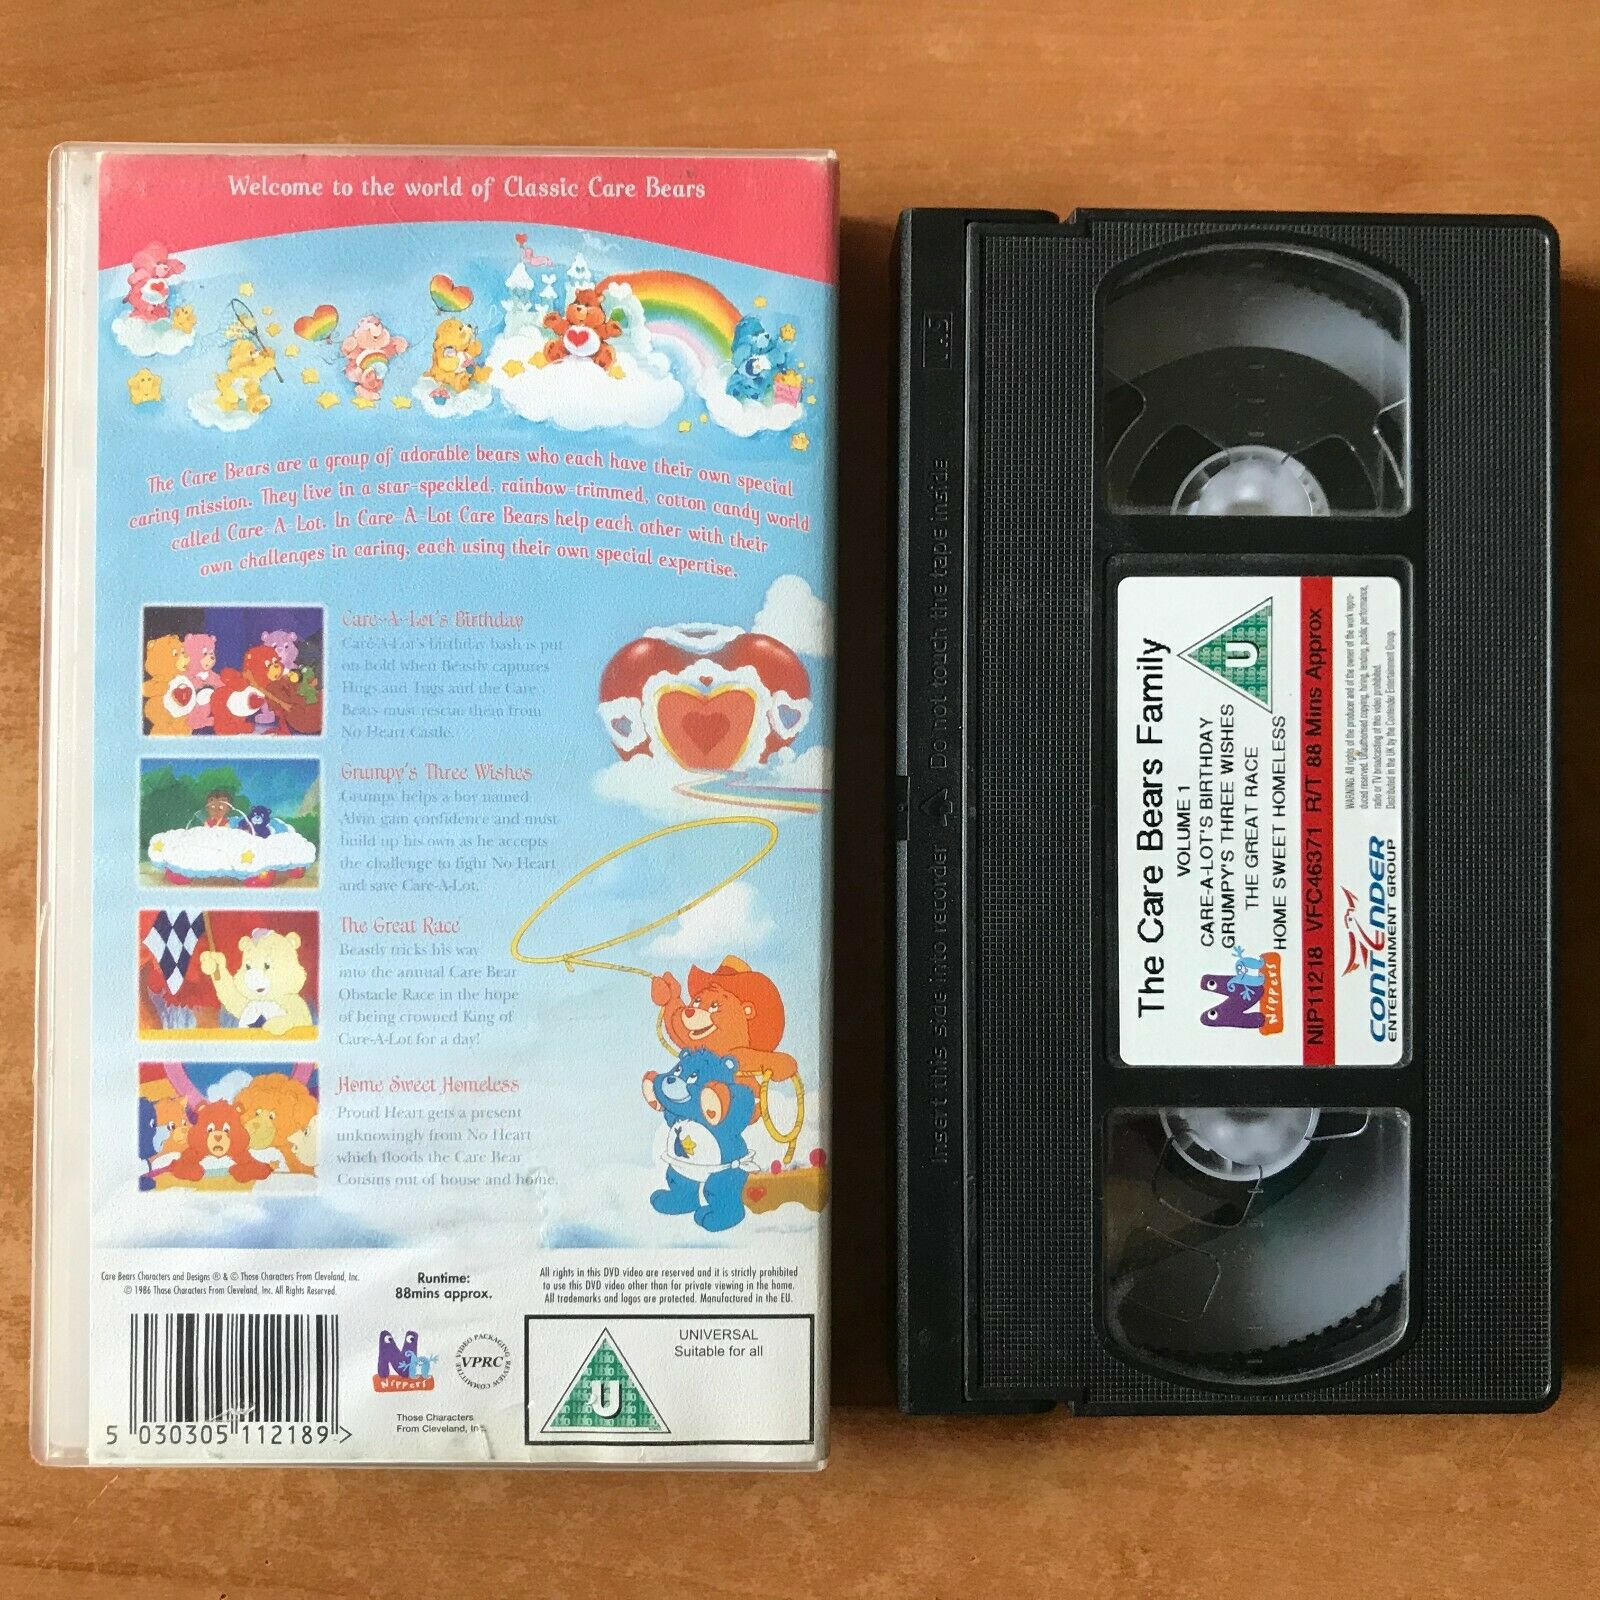 Care Bears (Vol. 1): "The Great Race" [Time: 88mins] Animated - Kids - Pal VHS-